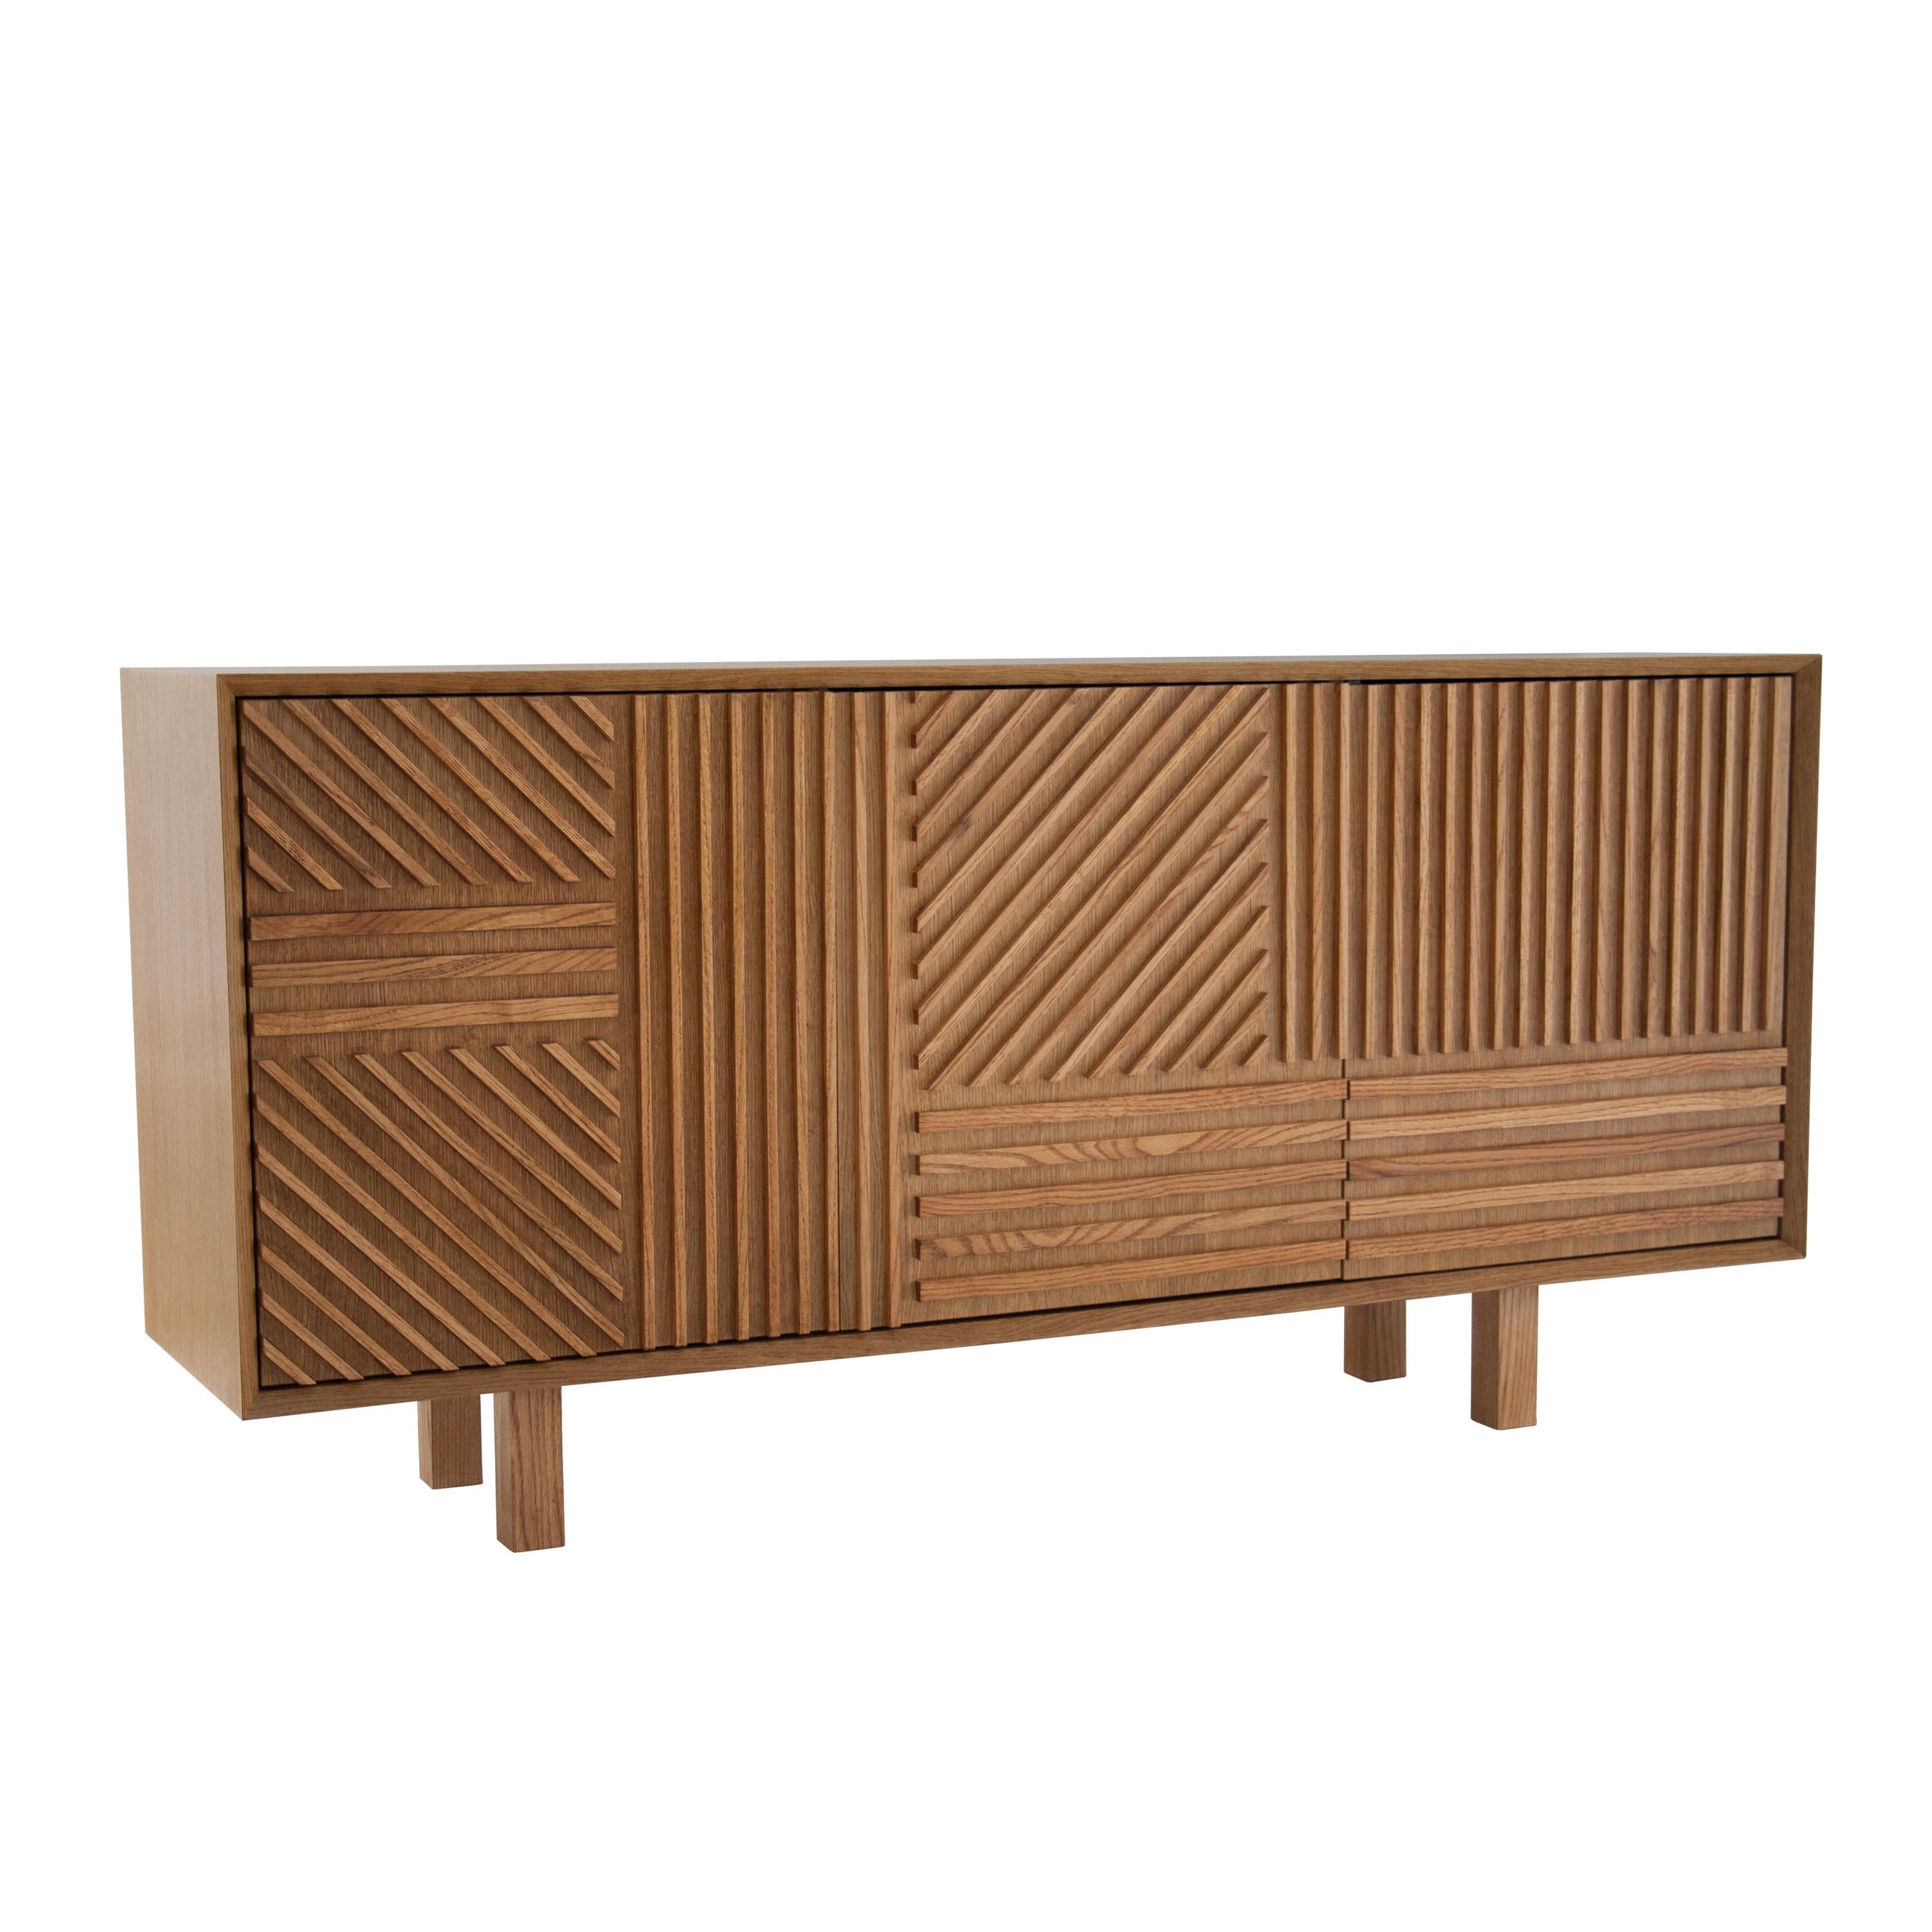 Sideboard designed by IKB 191 Madrid. Handcrafted piece made of oakwood. With three doors with slat fronts, and storage space inside.